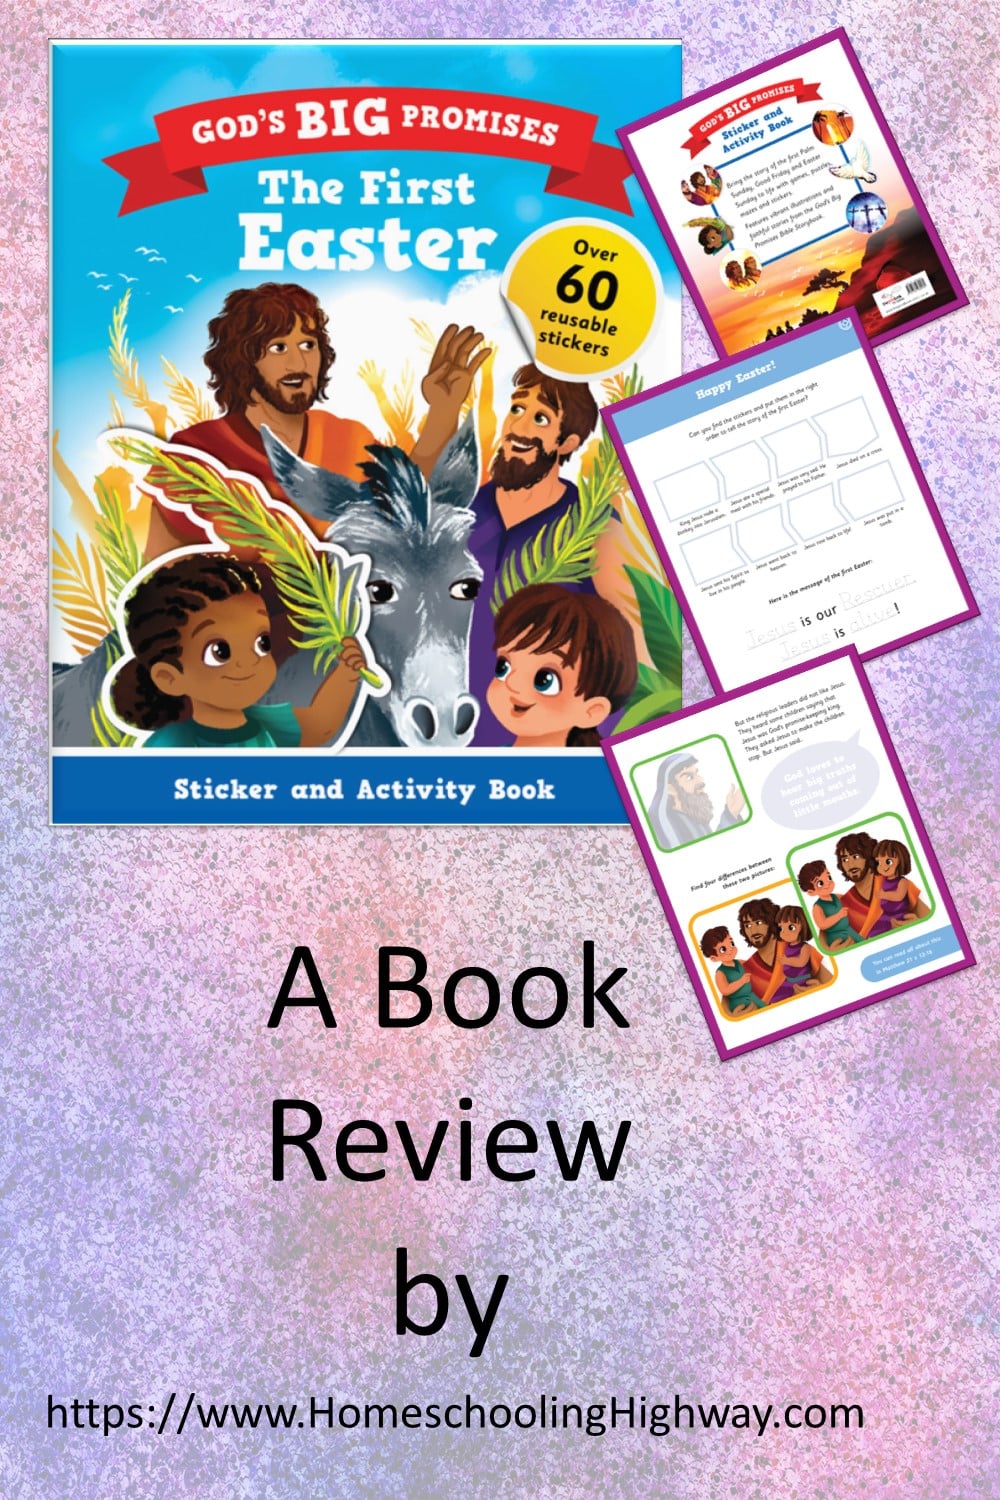 The First Easter Sticker and Activity Book written by Carl Laferton. Book reviewed by Homeschooling Highway